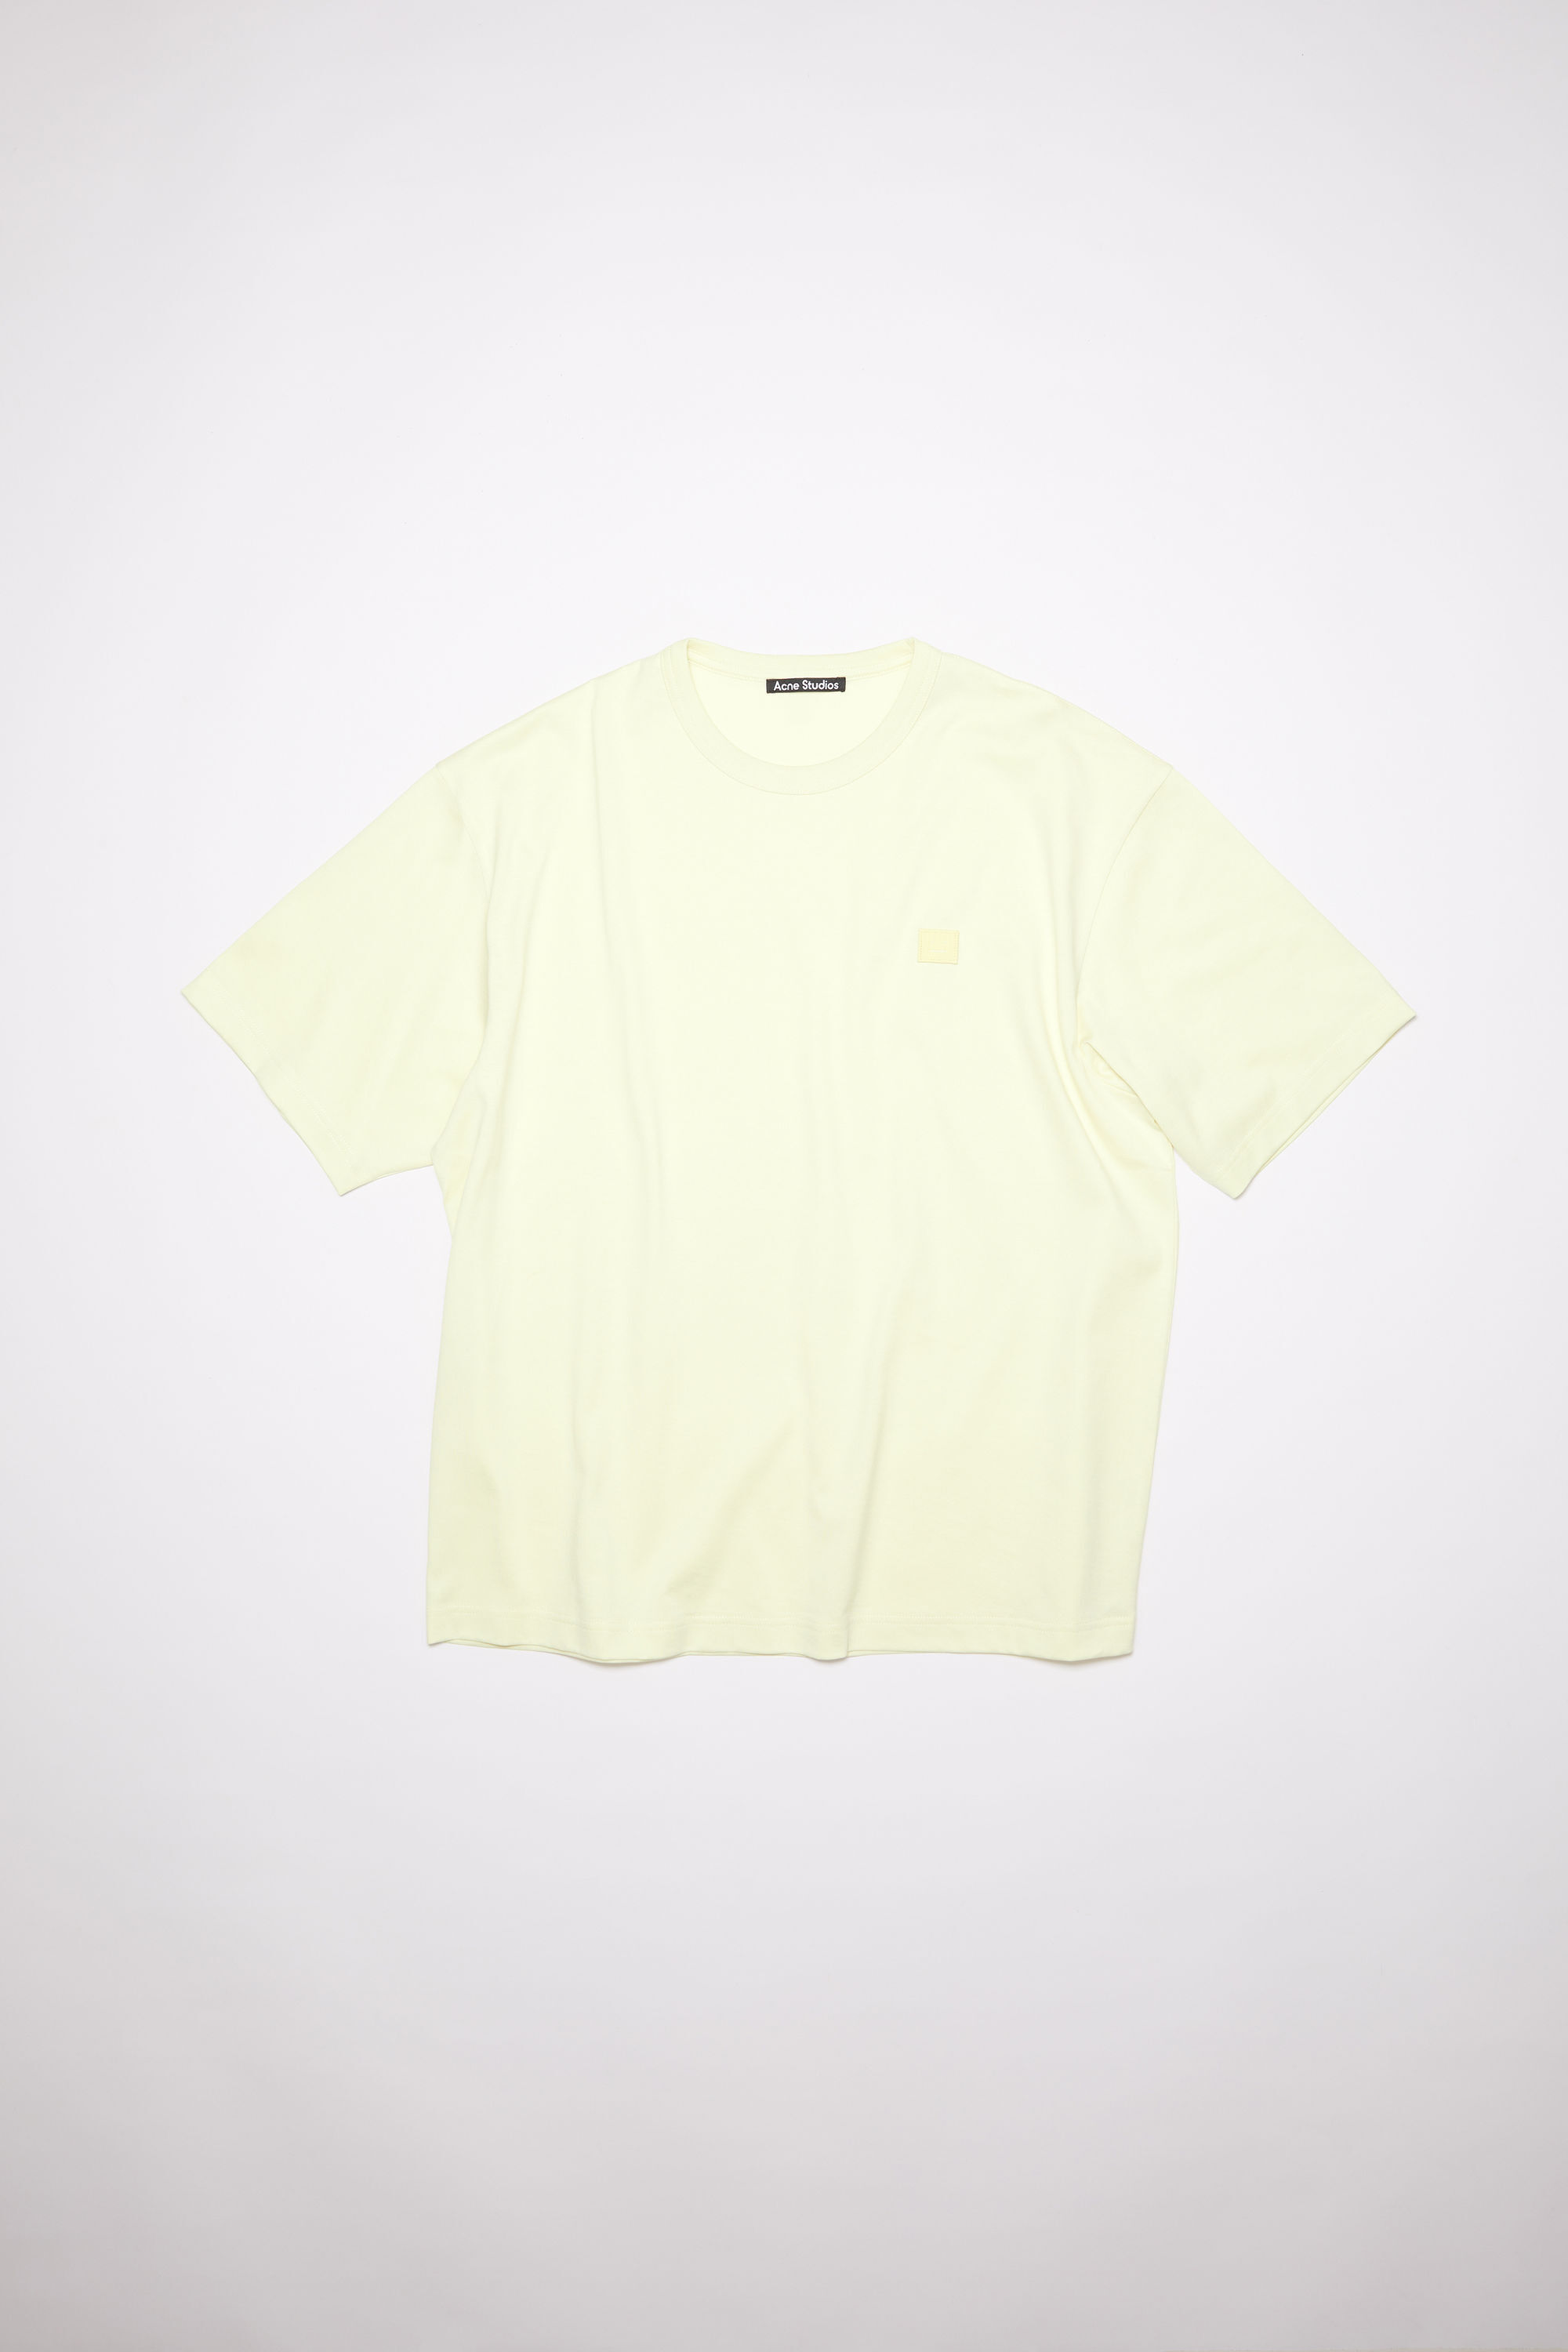 Acne Studios - Relaxed fit t-shirt - Vanilla yellow